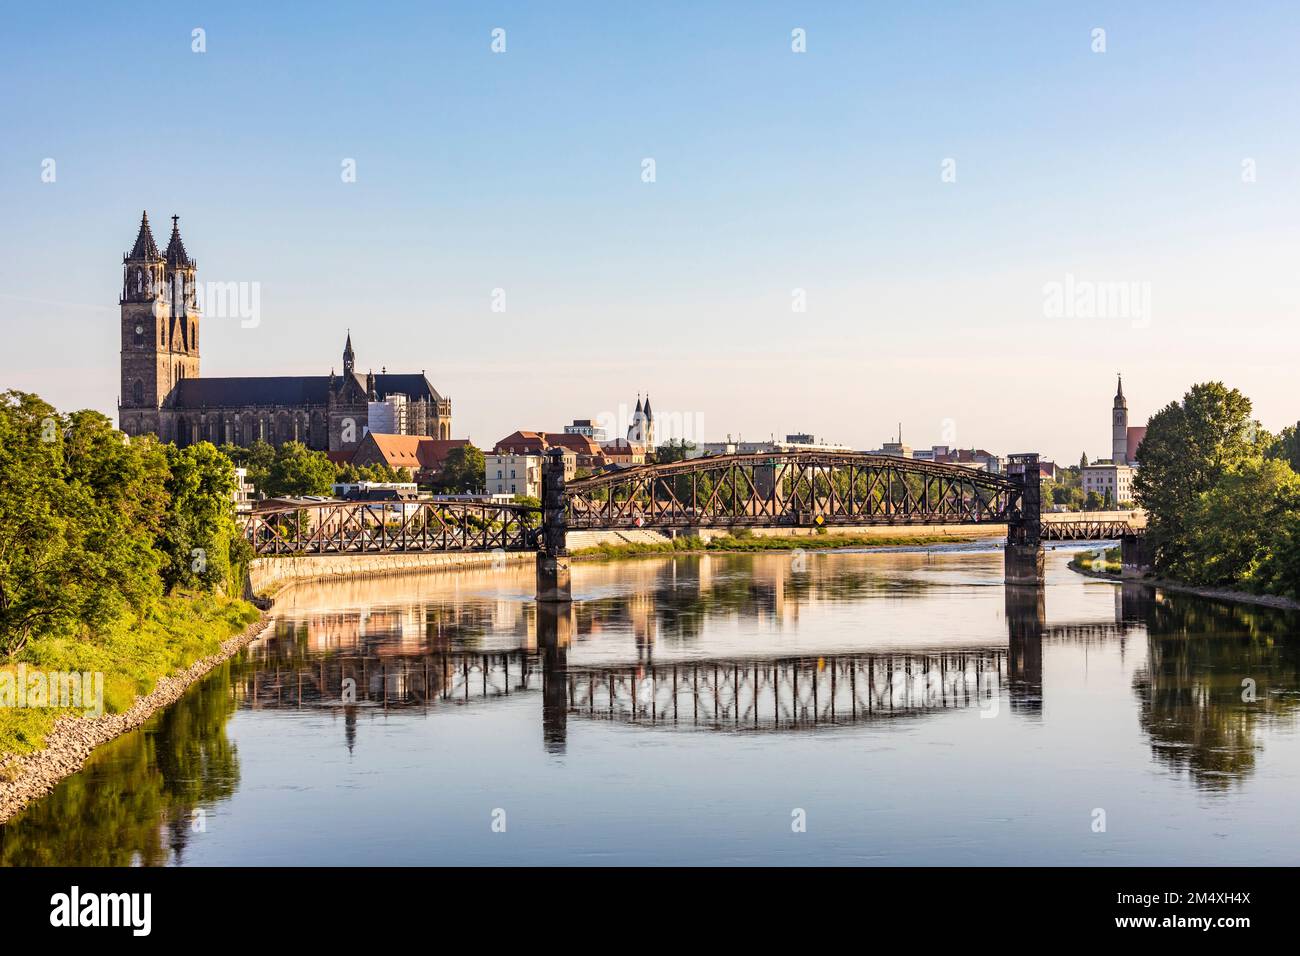 Germany, Saxony-Anhalt, Magdeburg, Historic lift brige with Magdeburg Cathedral in background Stock Photo